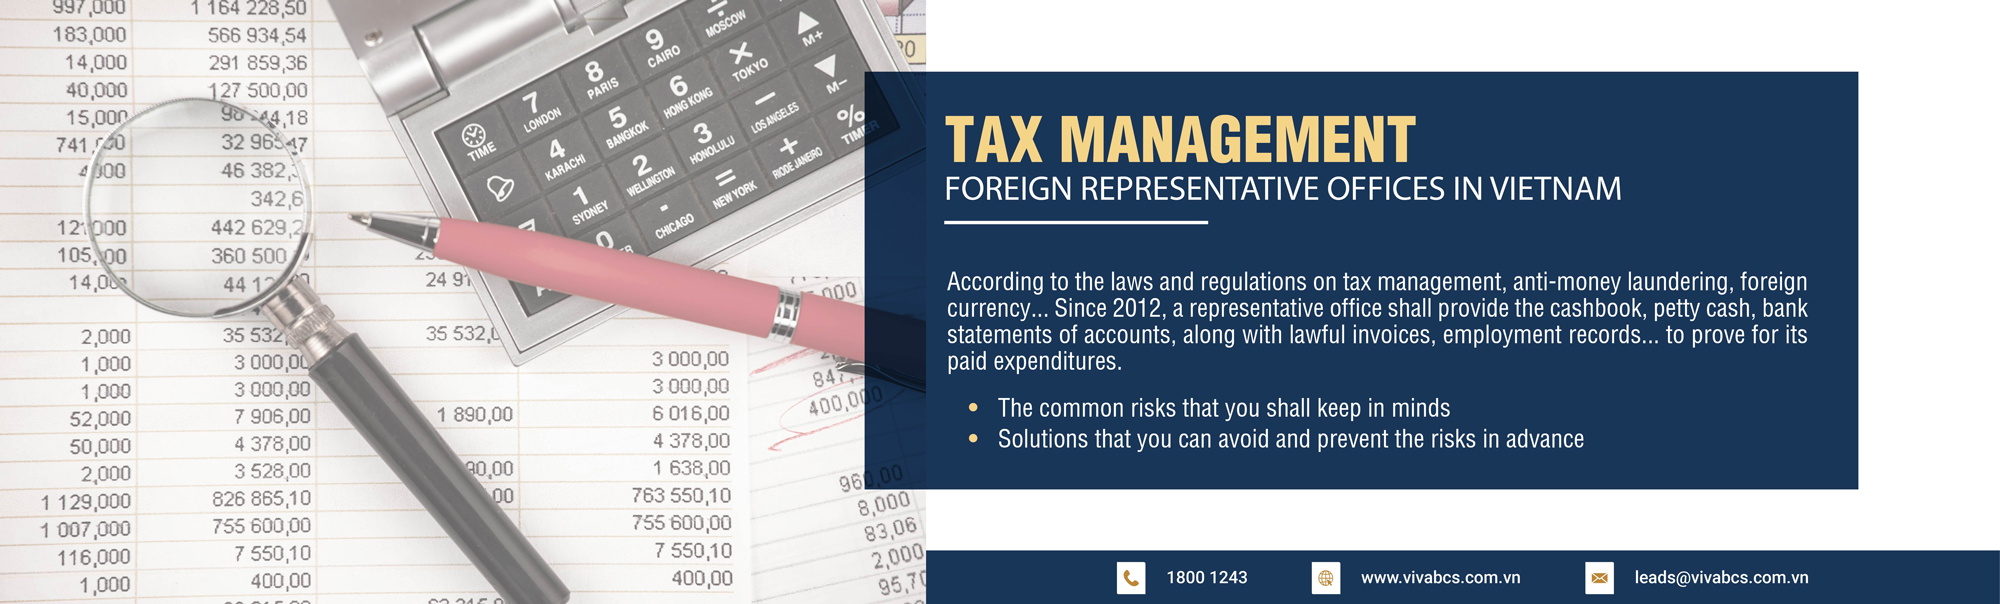 Tax management for representative offices in Vietnam